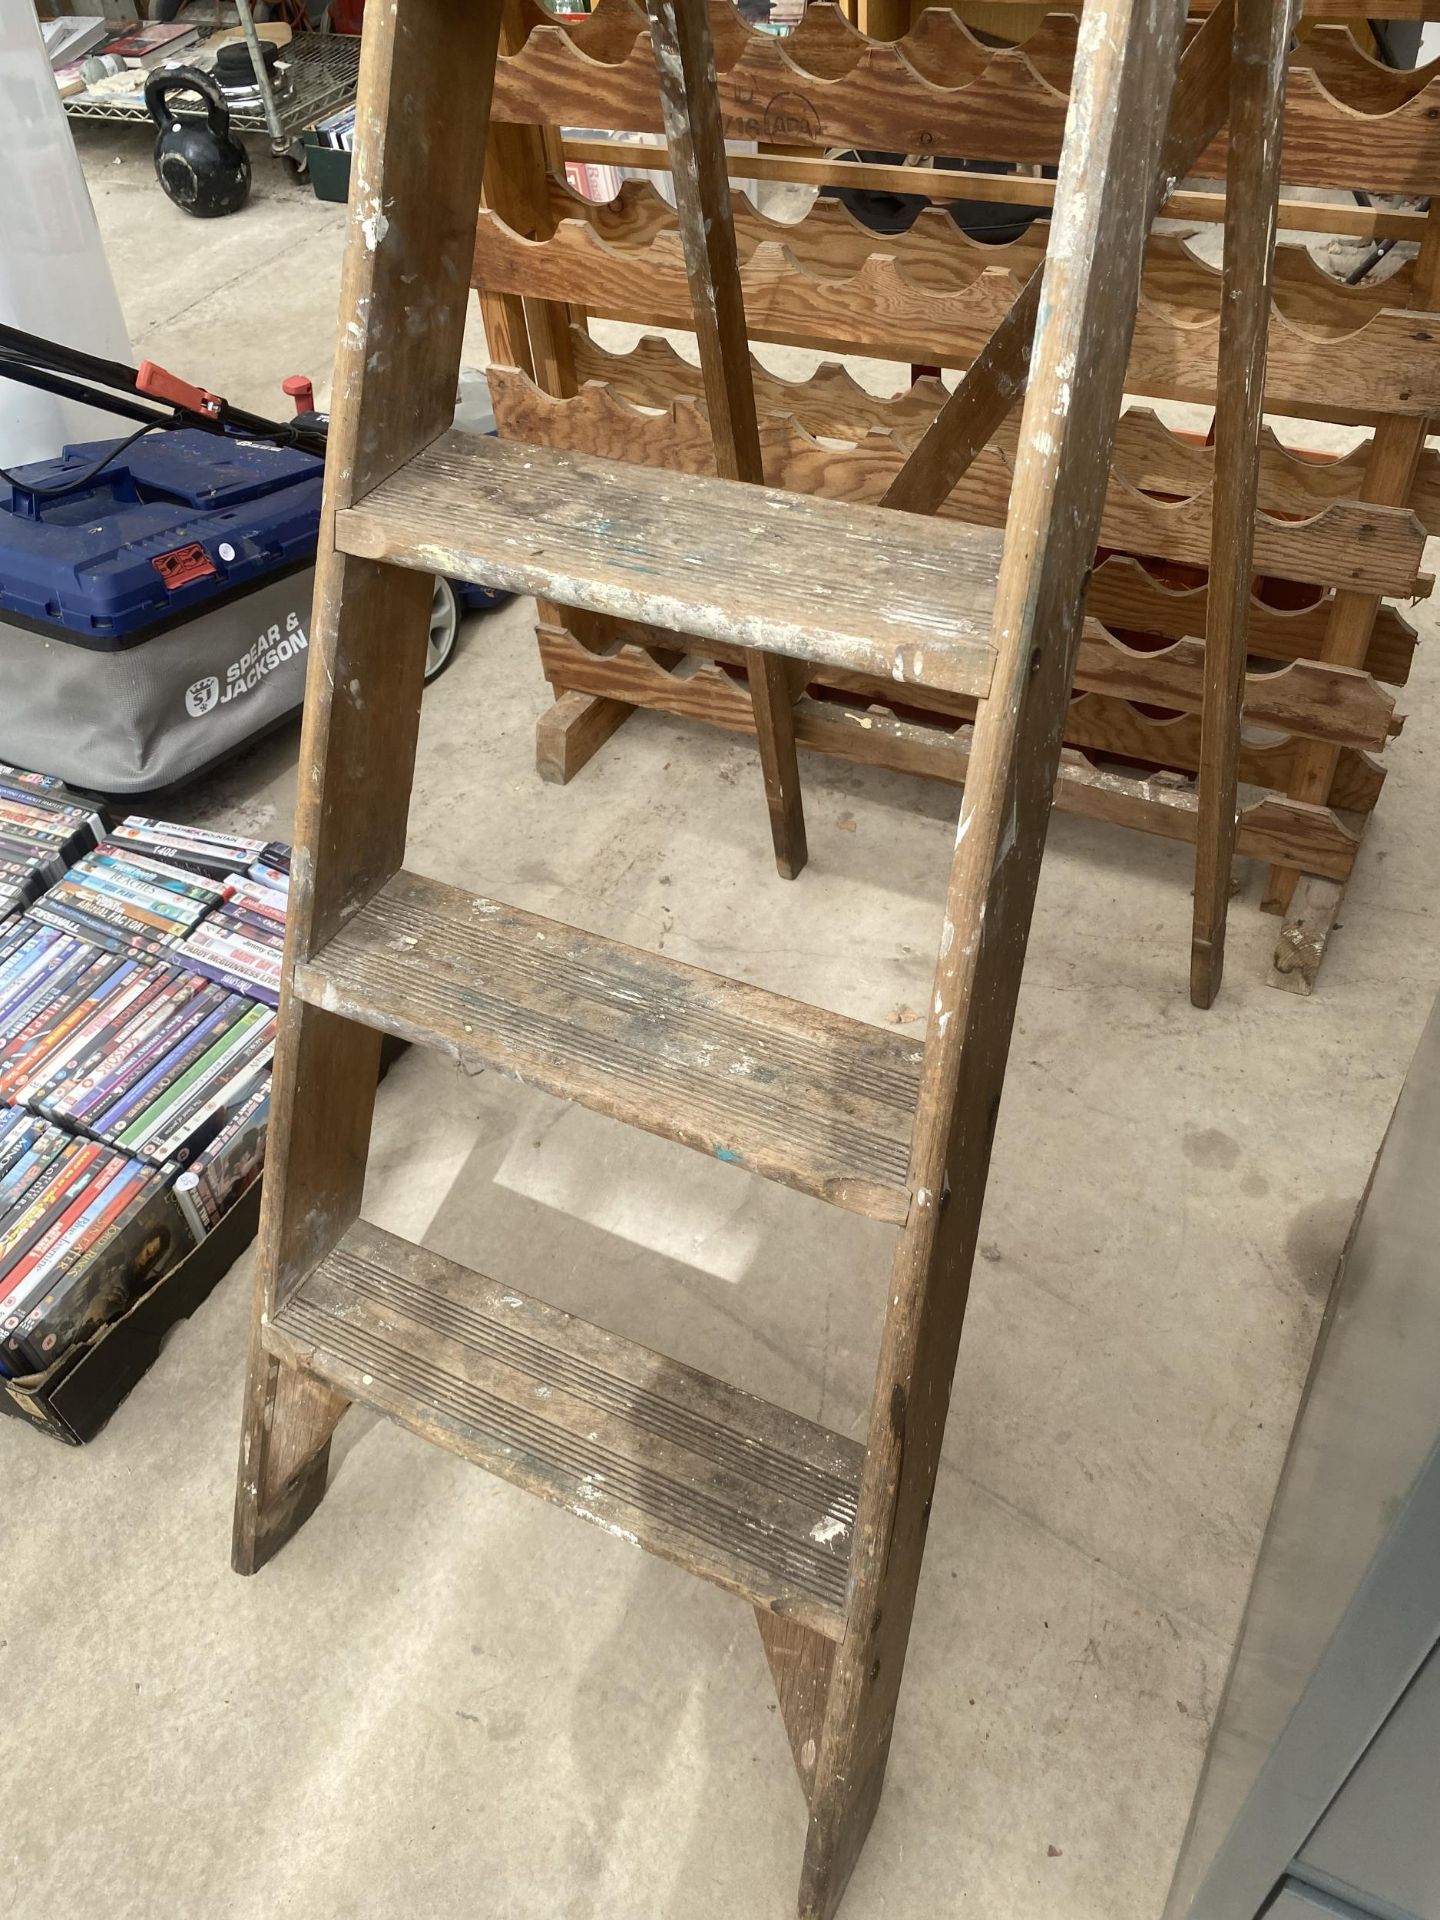 A VINTAGE FOUR RUNG WOODEN STEP LADDER - Image 2 of 3